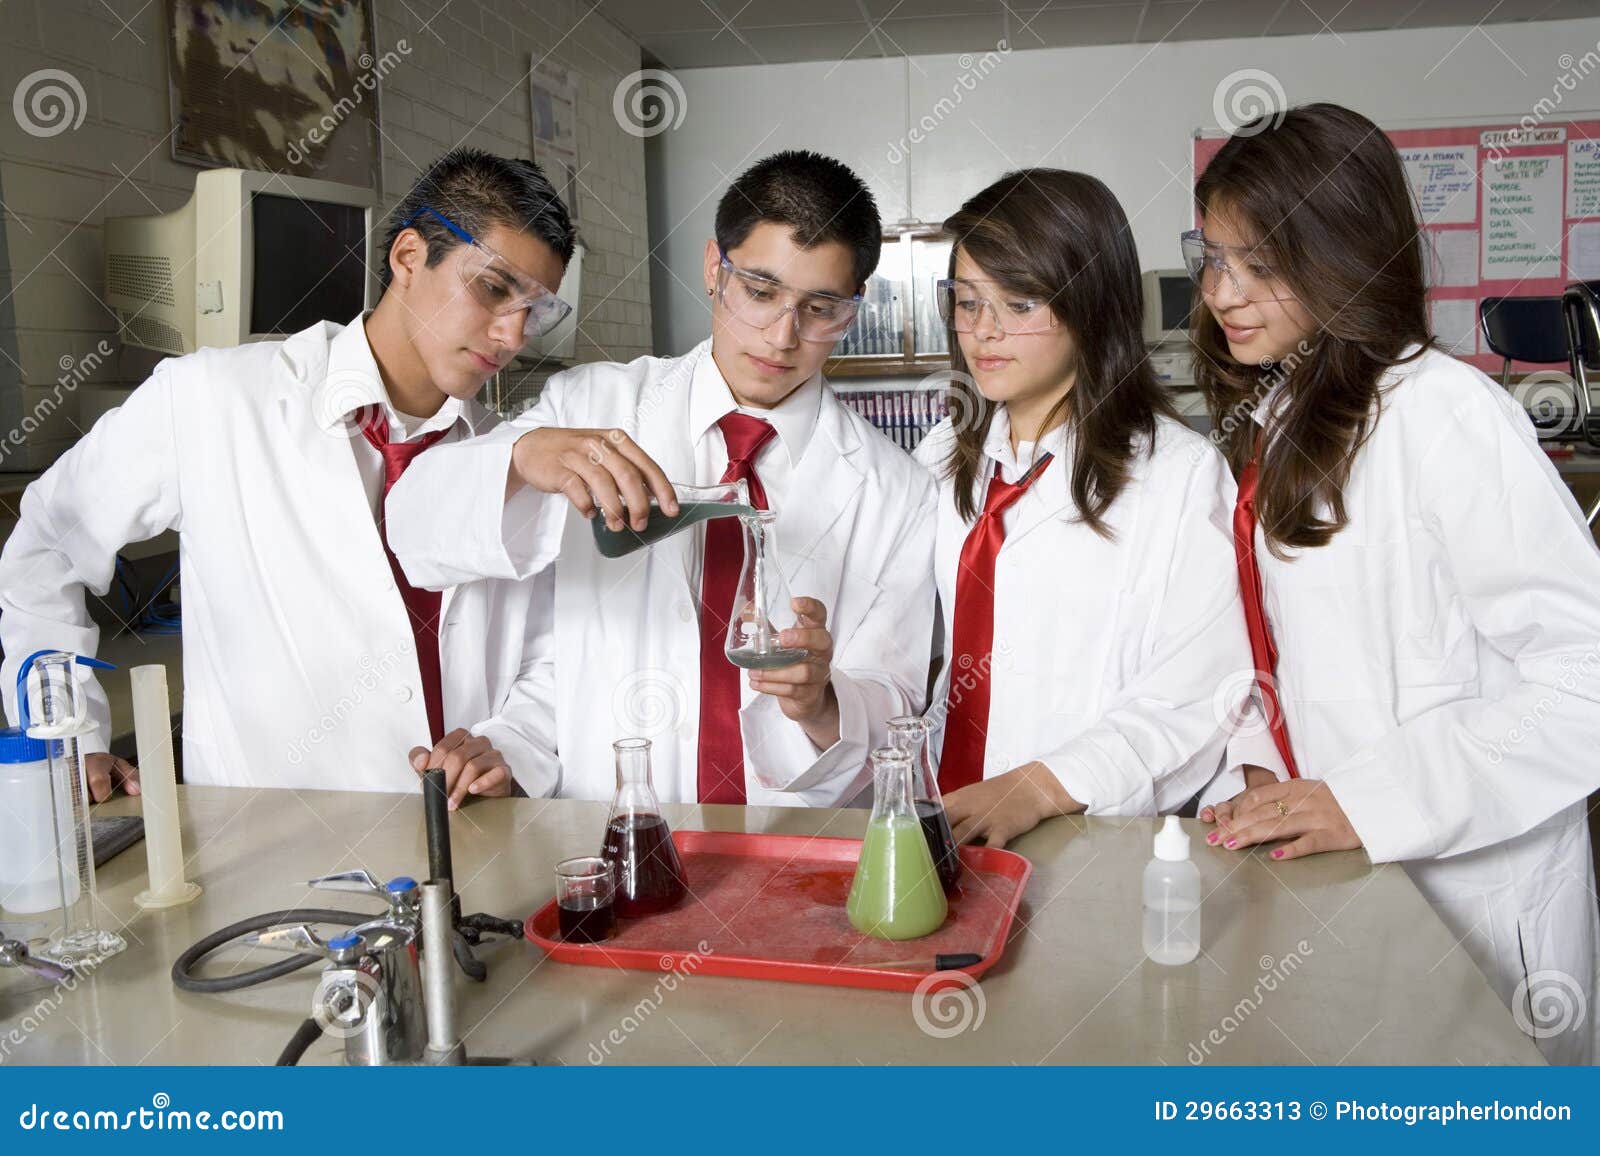 high school students conducting science experiment